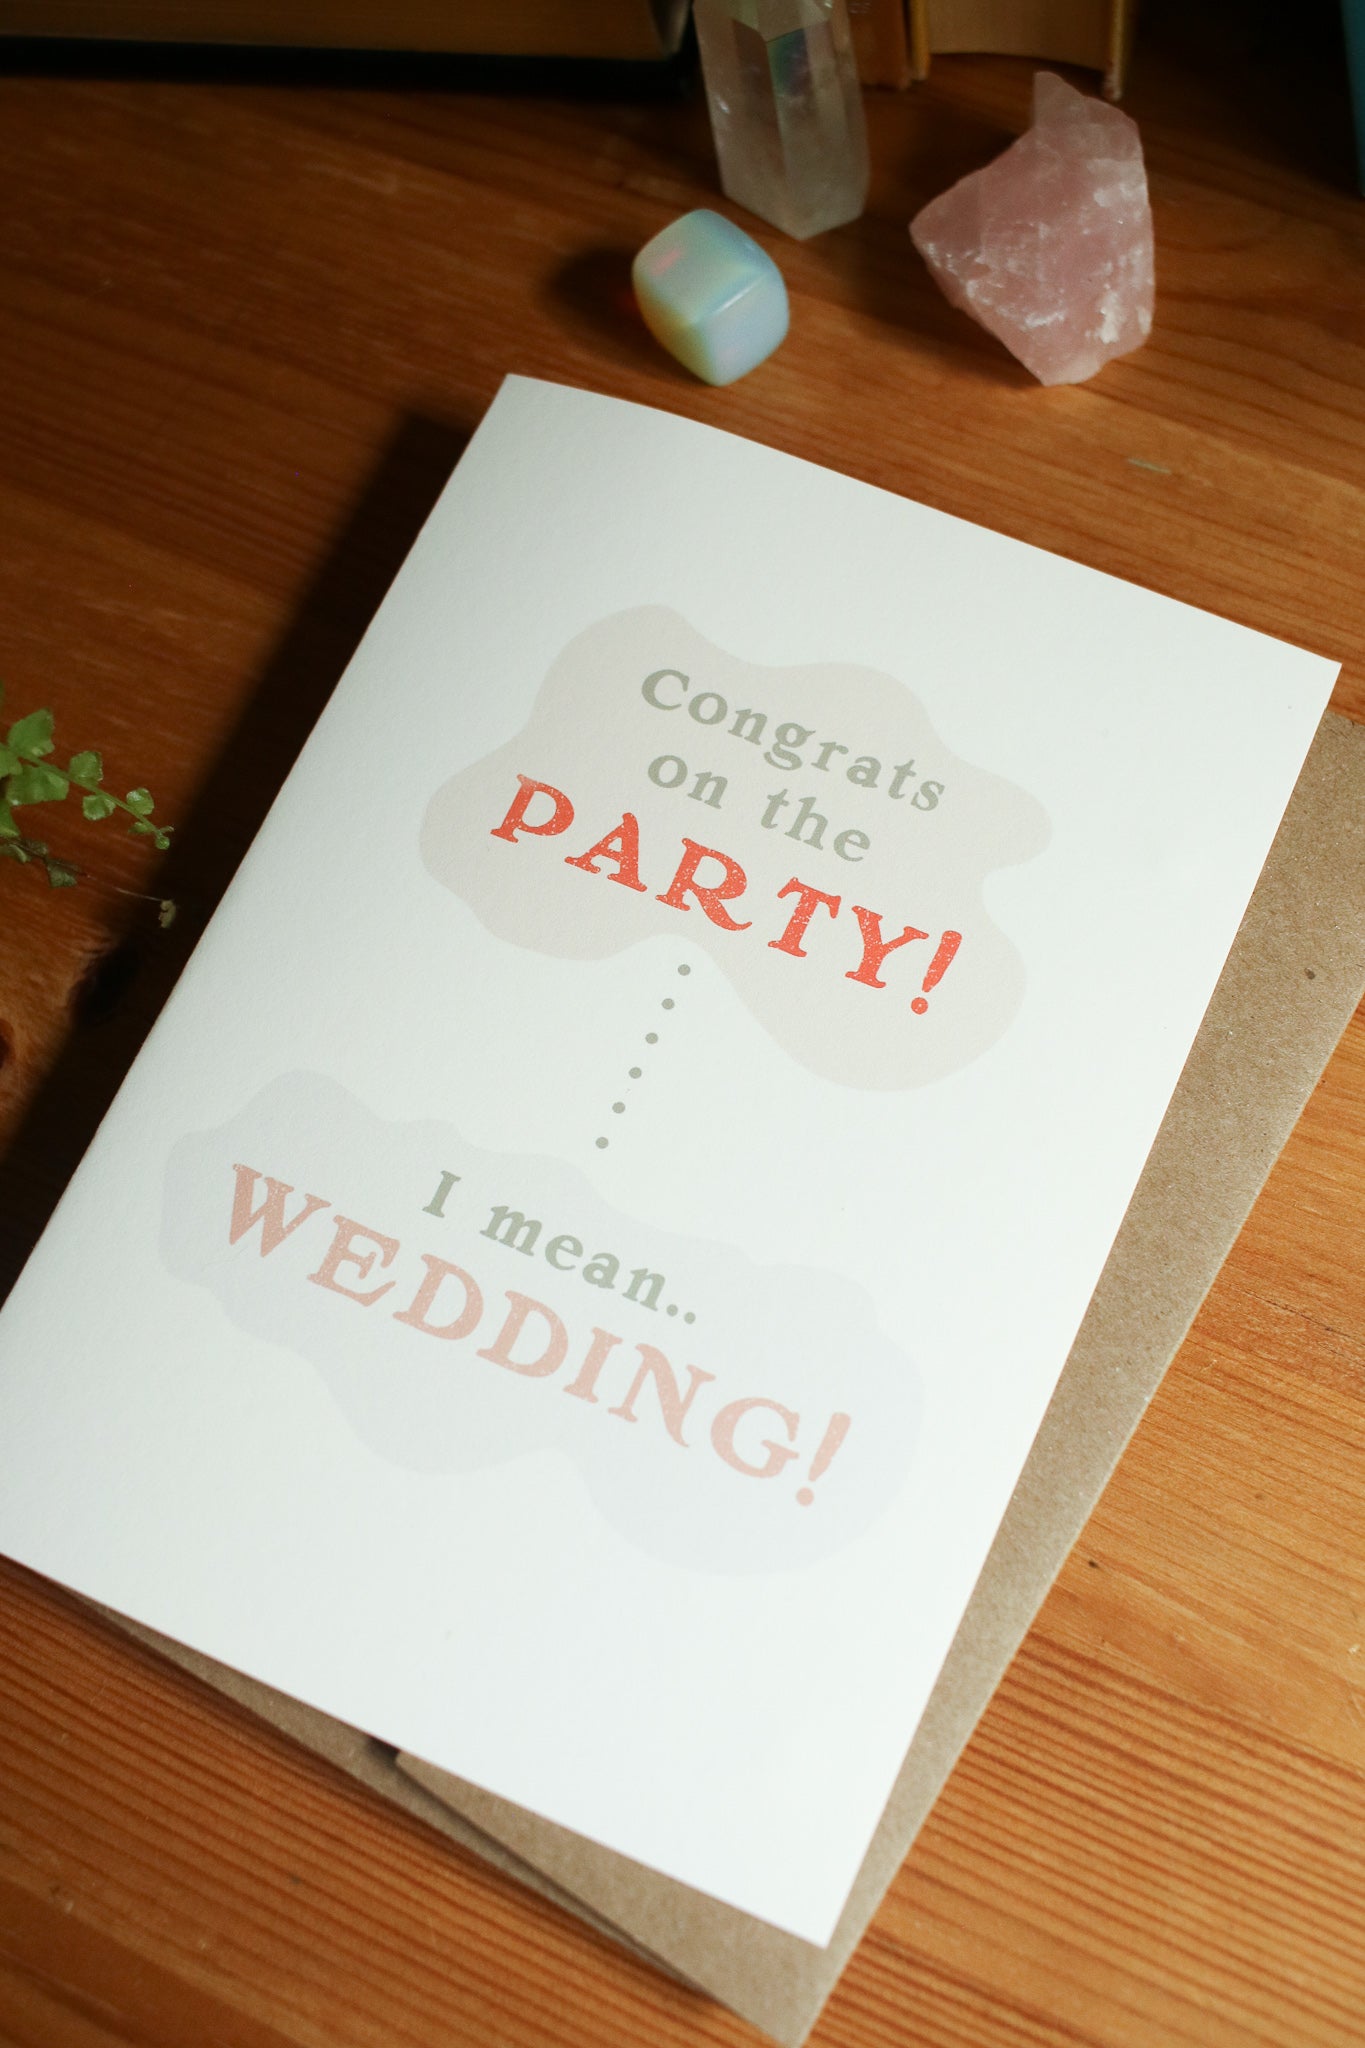 Congrats on the Party ... I mean Wedding - Greeting Card